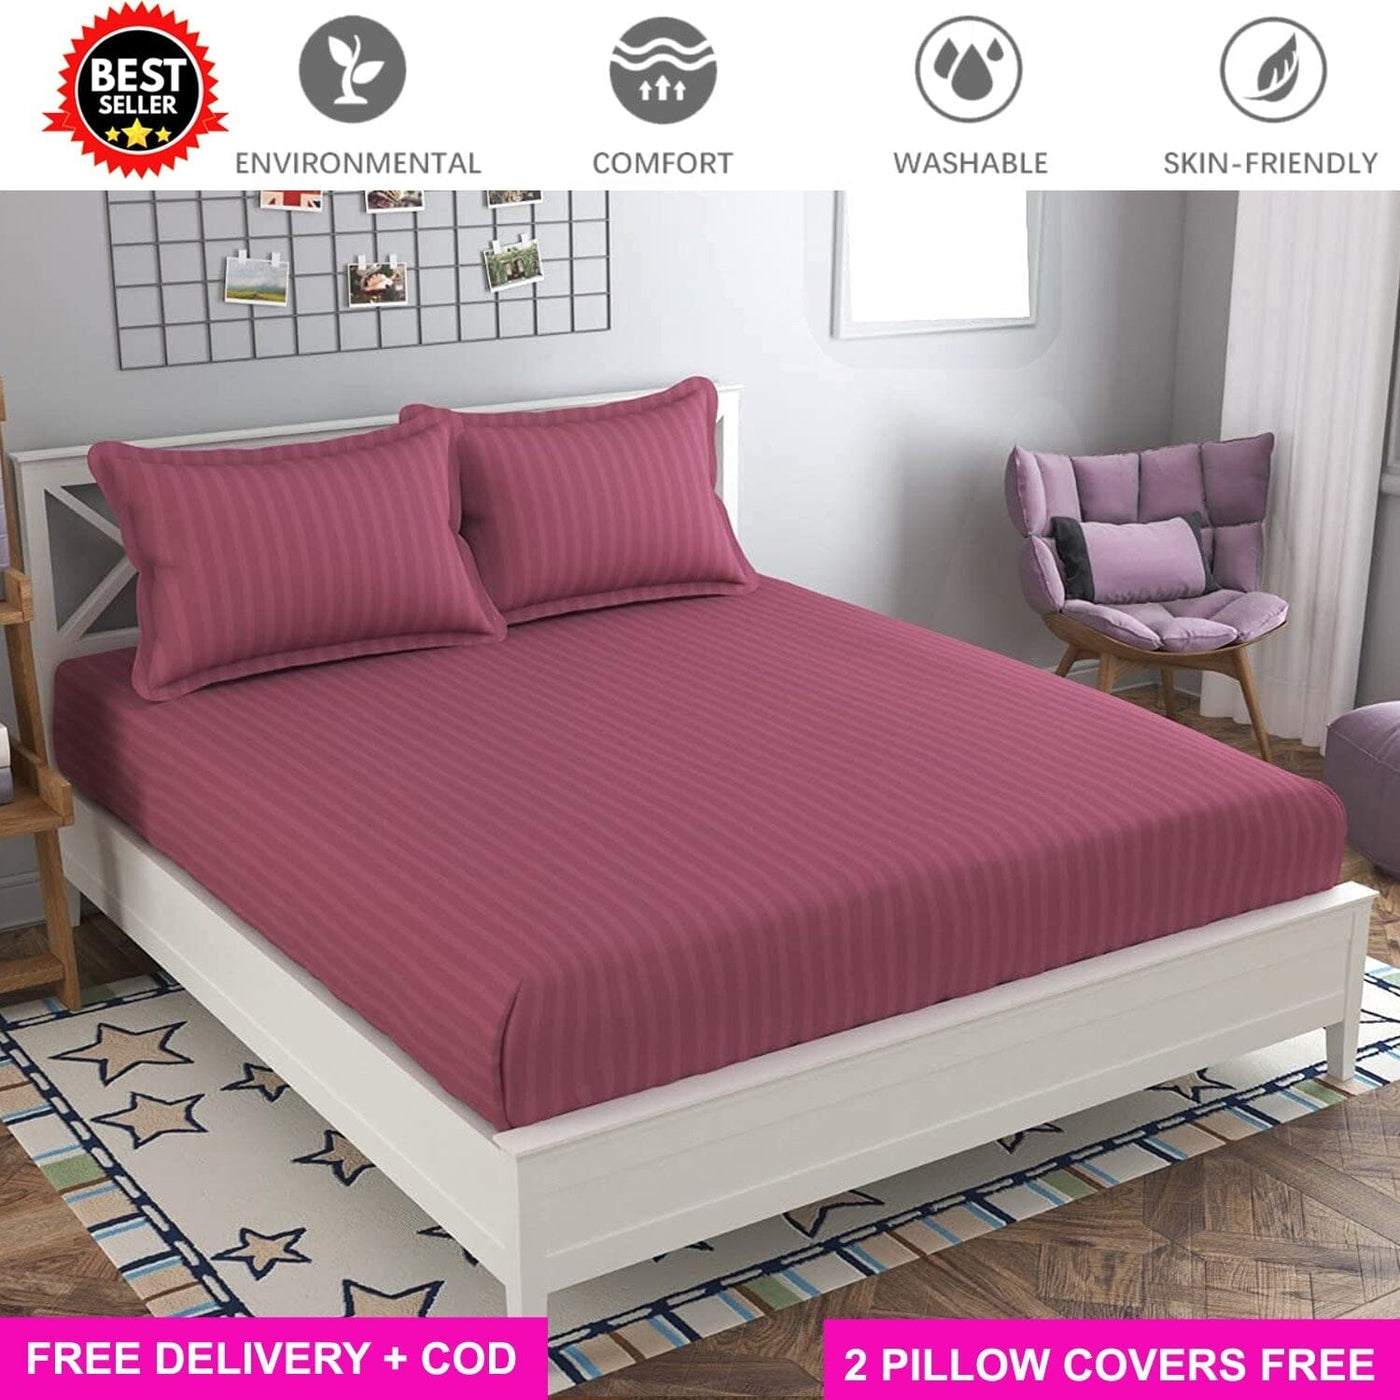 Onion Satin Full Elastic Fitted Bedsheet with 2 Pillow Covers Bed Sheets Great Happy IN KING SIZE - ₹1299 